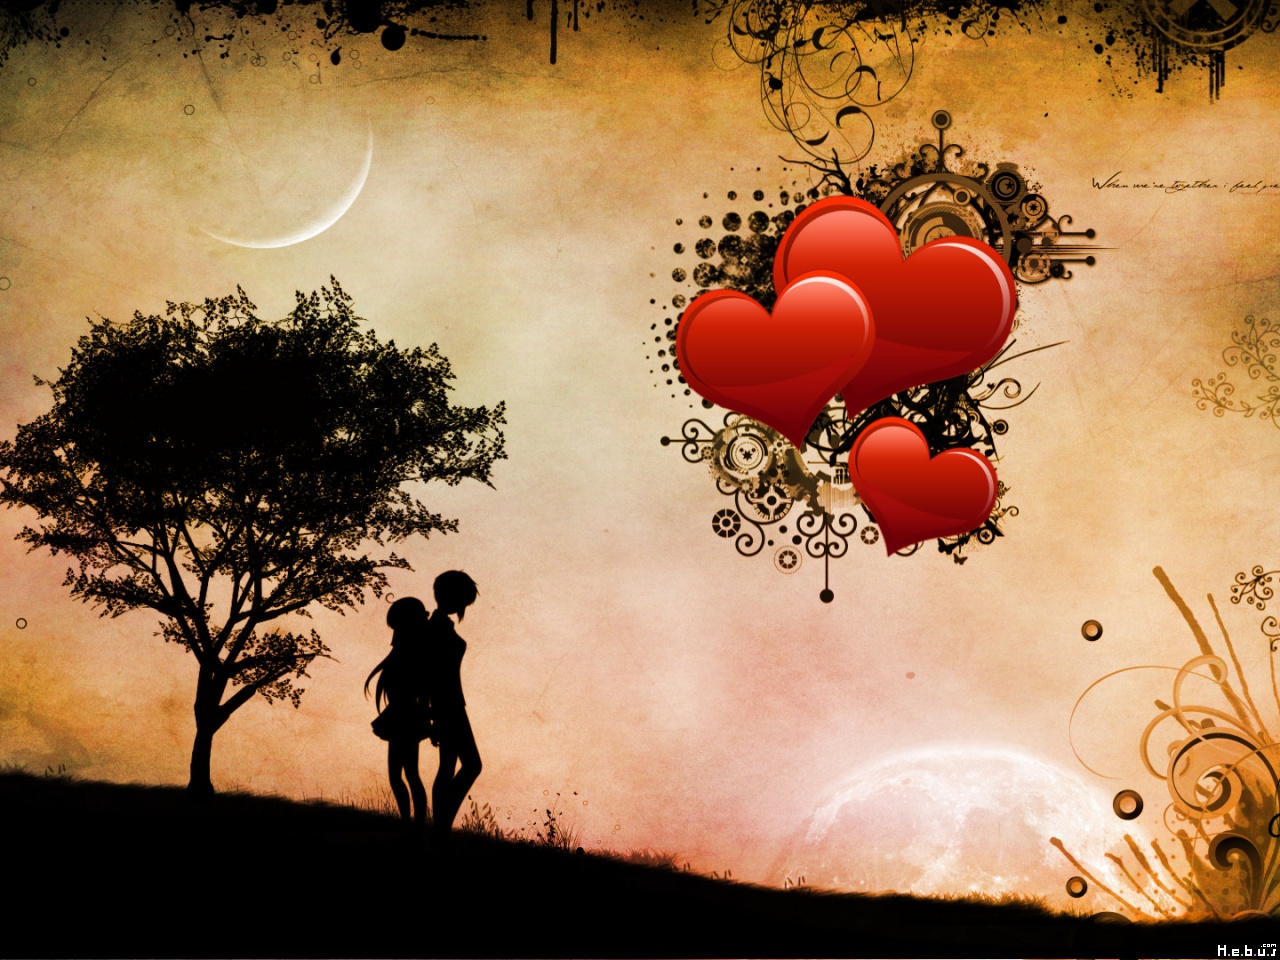 46 Love HD Images for Free (2MTX Love HD Wallpapers)